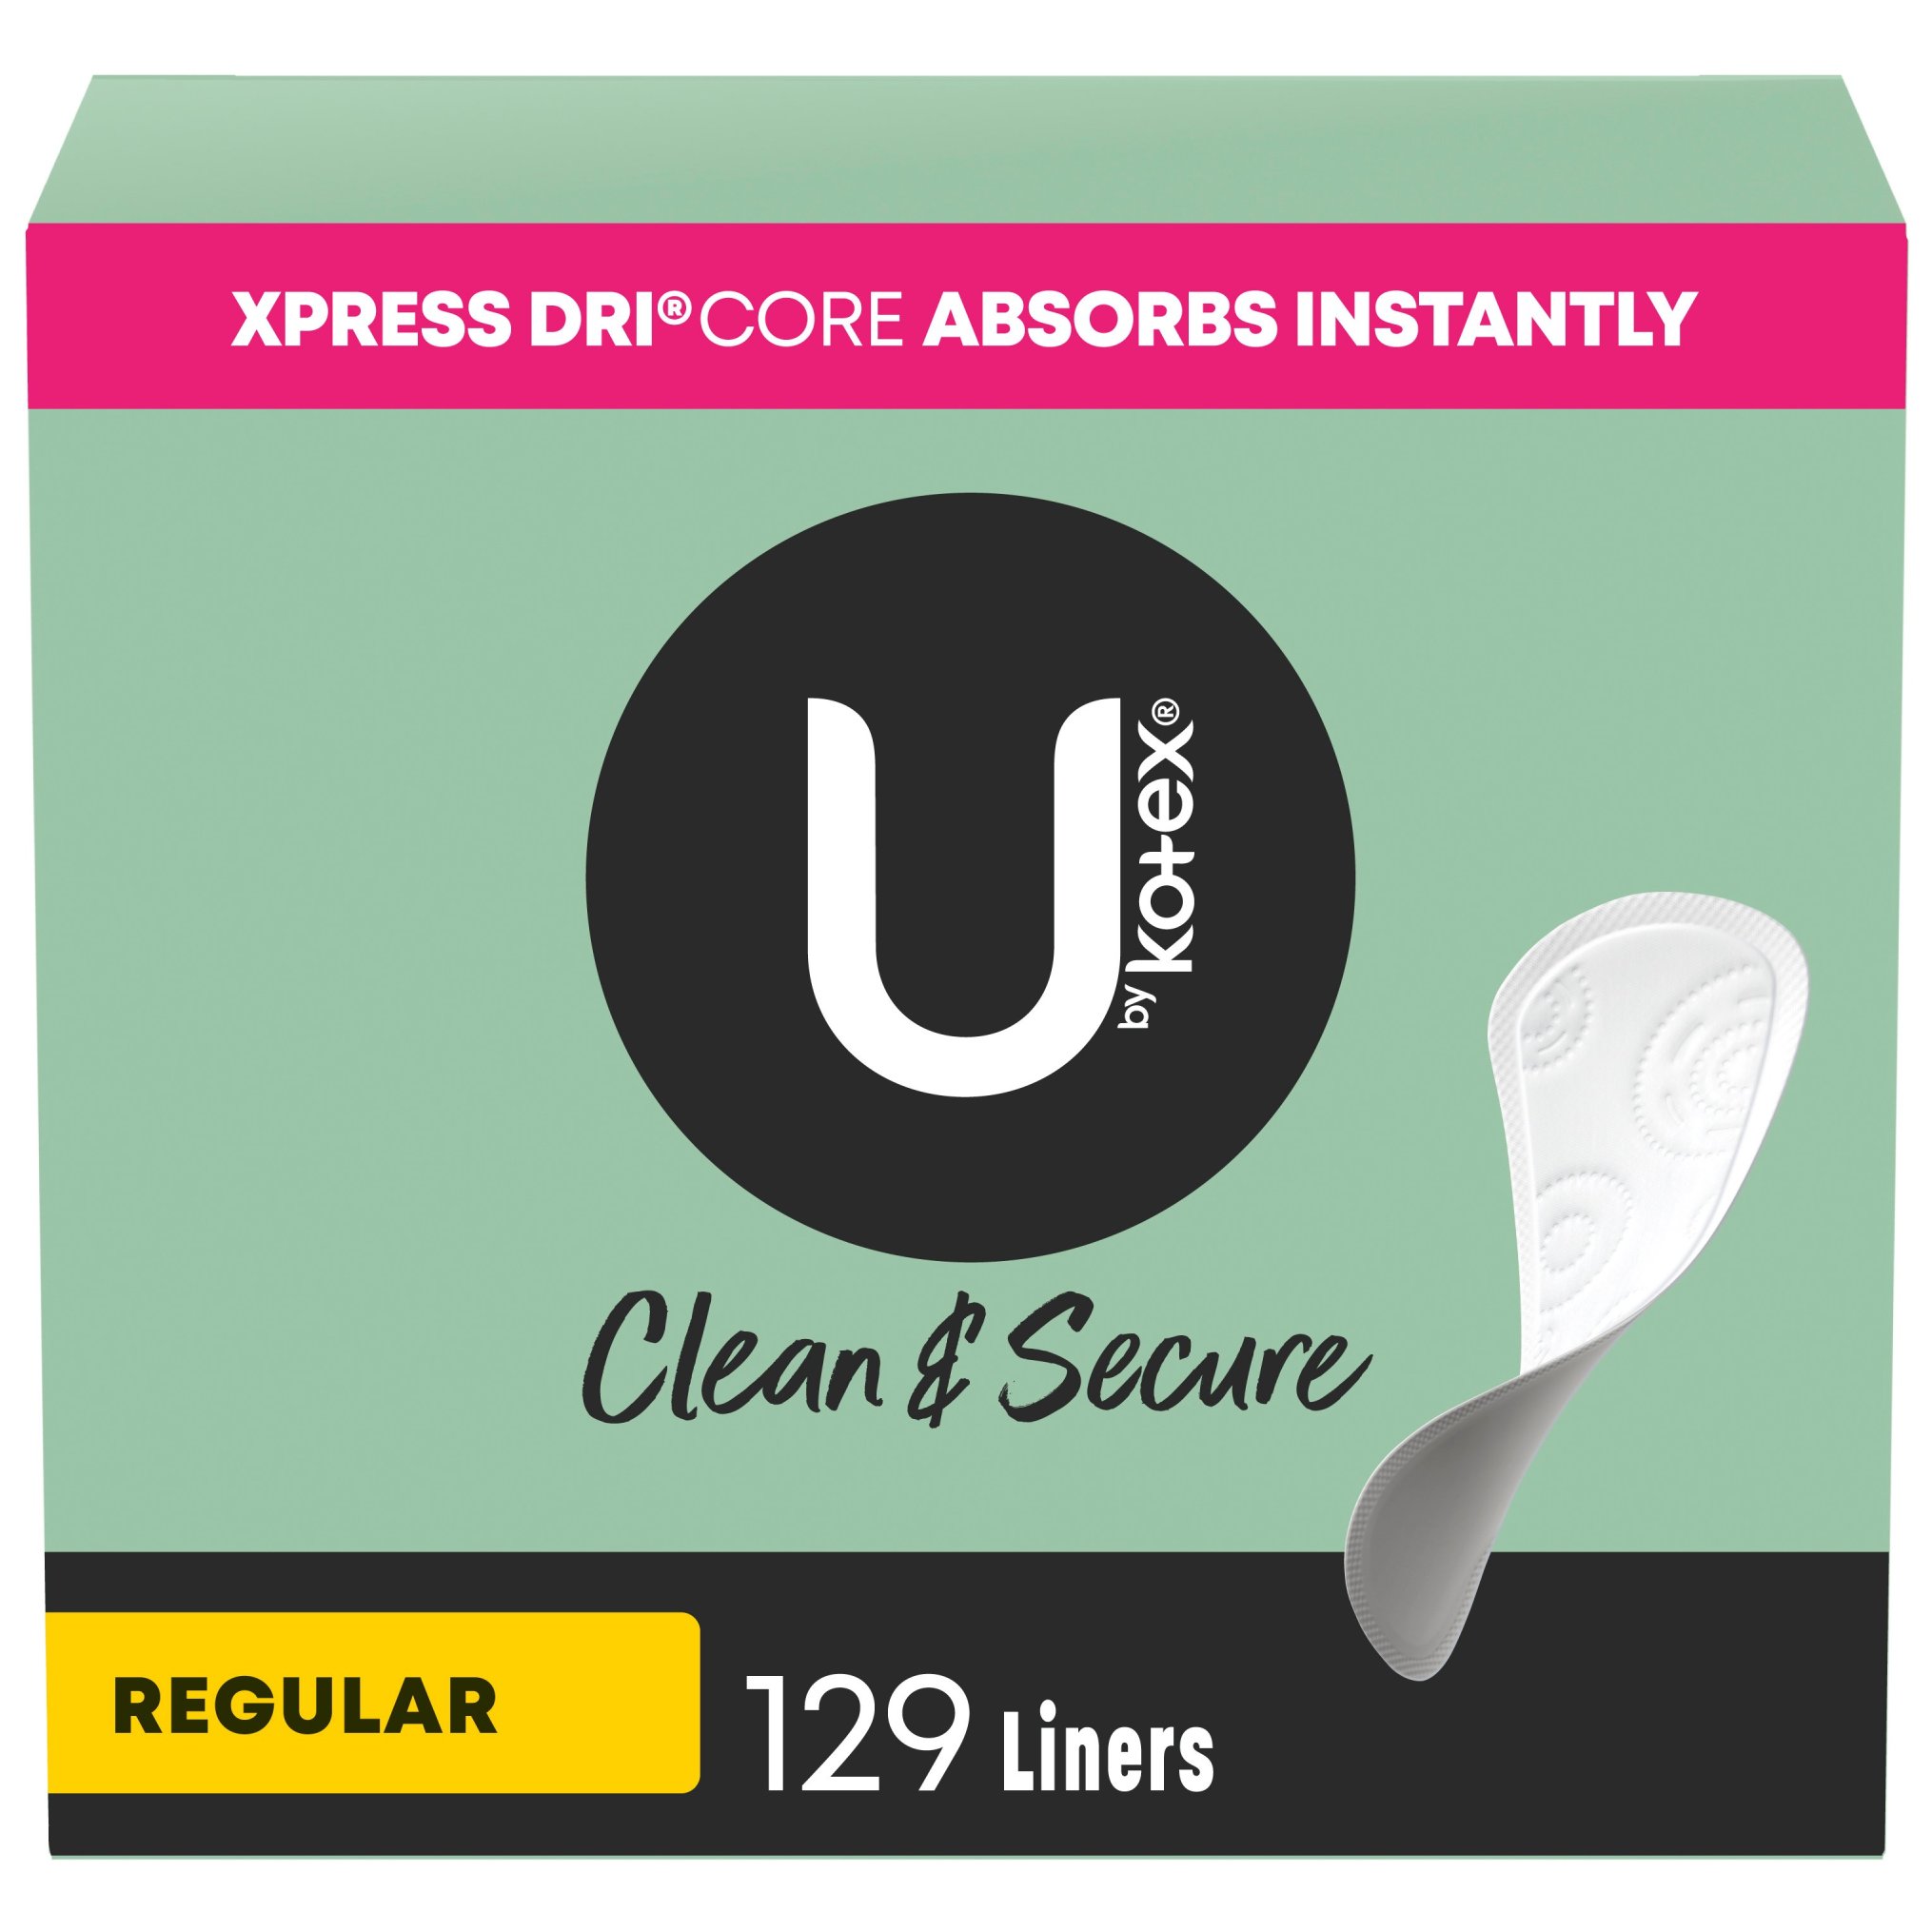 U by Kotex Lightdays Panty Liners, Regular, Unscented, 129 Count